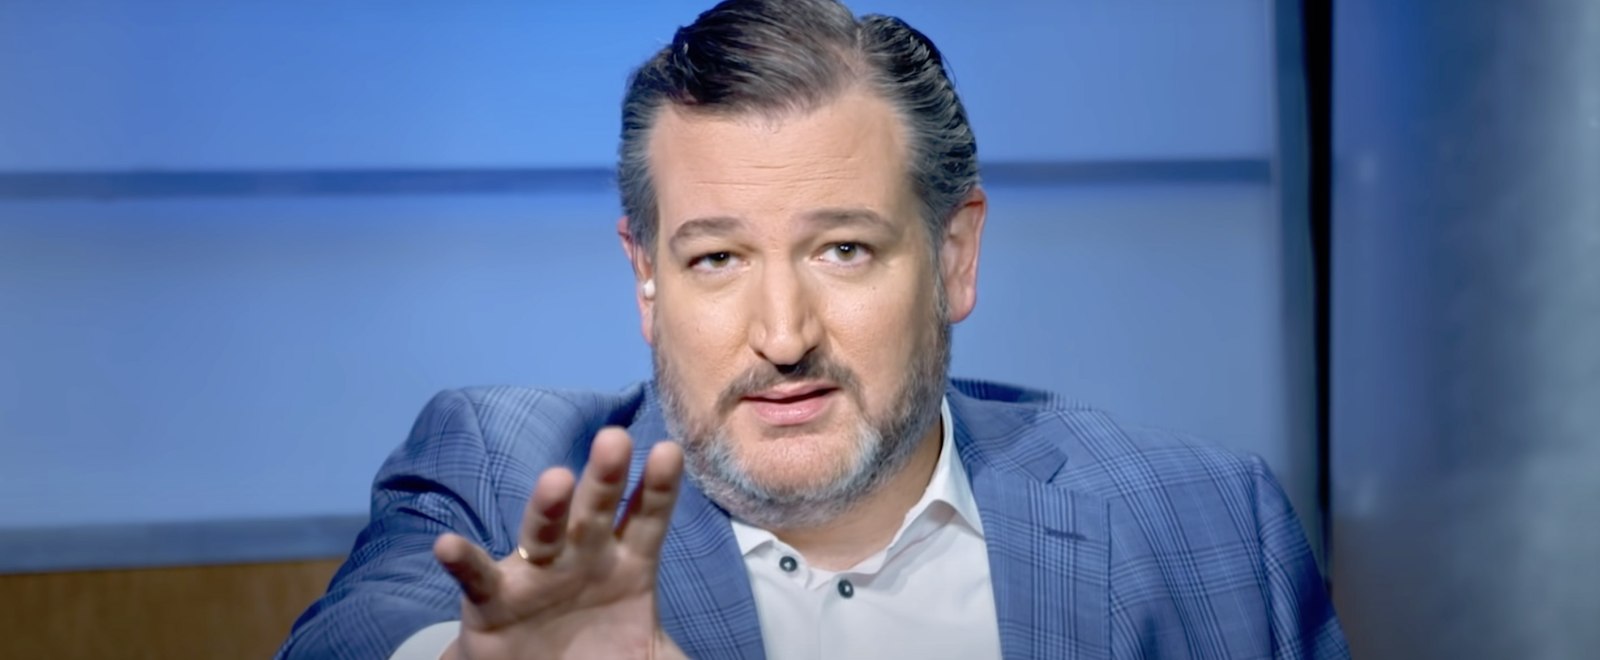 Ted Cruz’s Wildly Inaccurate Take On ‘Avengers’ And ‘Watchmen’ Is Getting Roasted By Everyone, Including A ‘Watchmen’ Writer